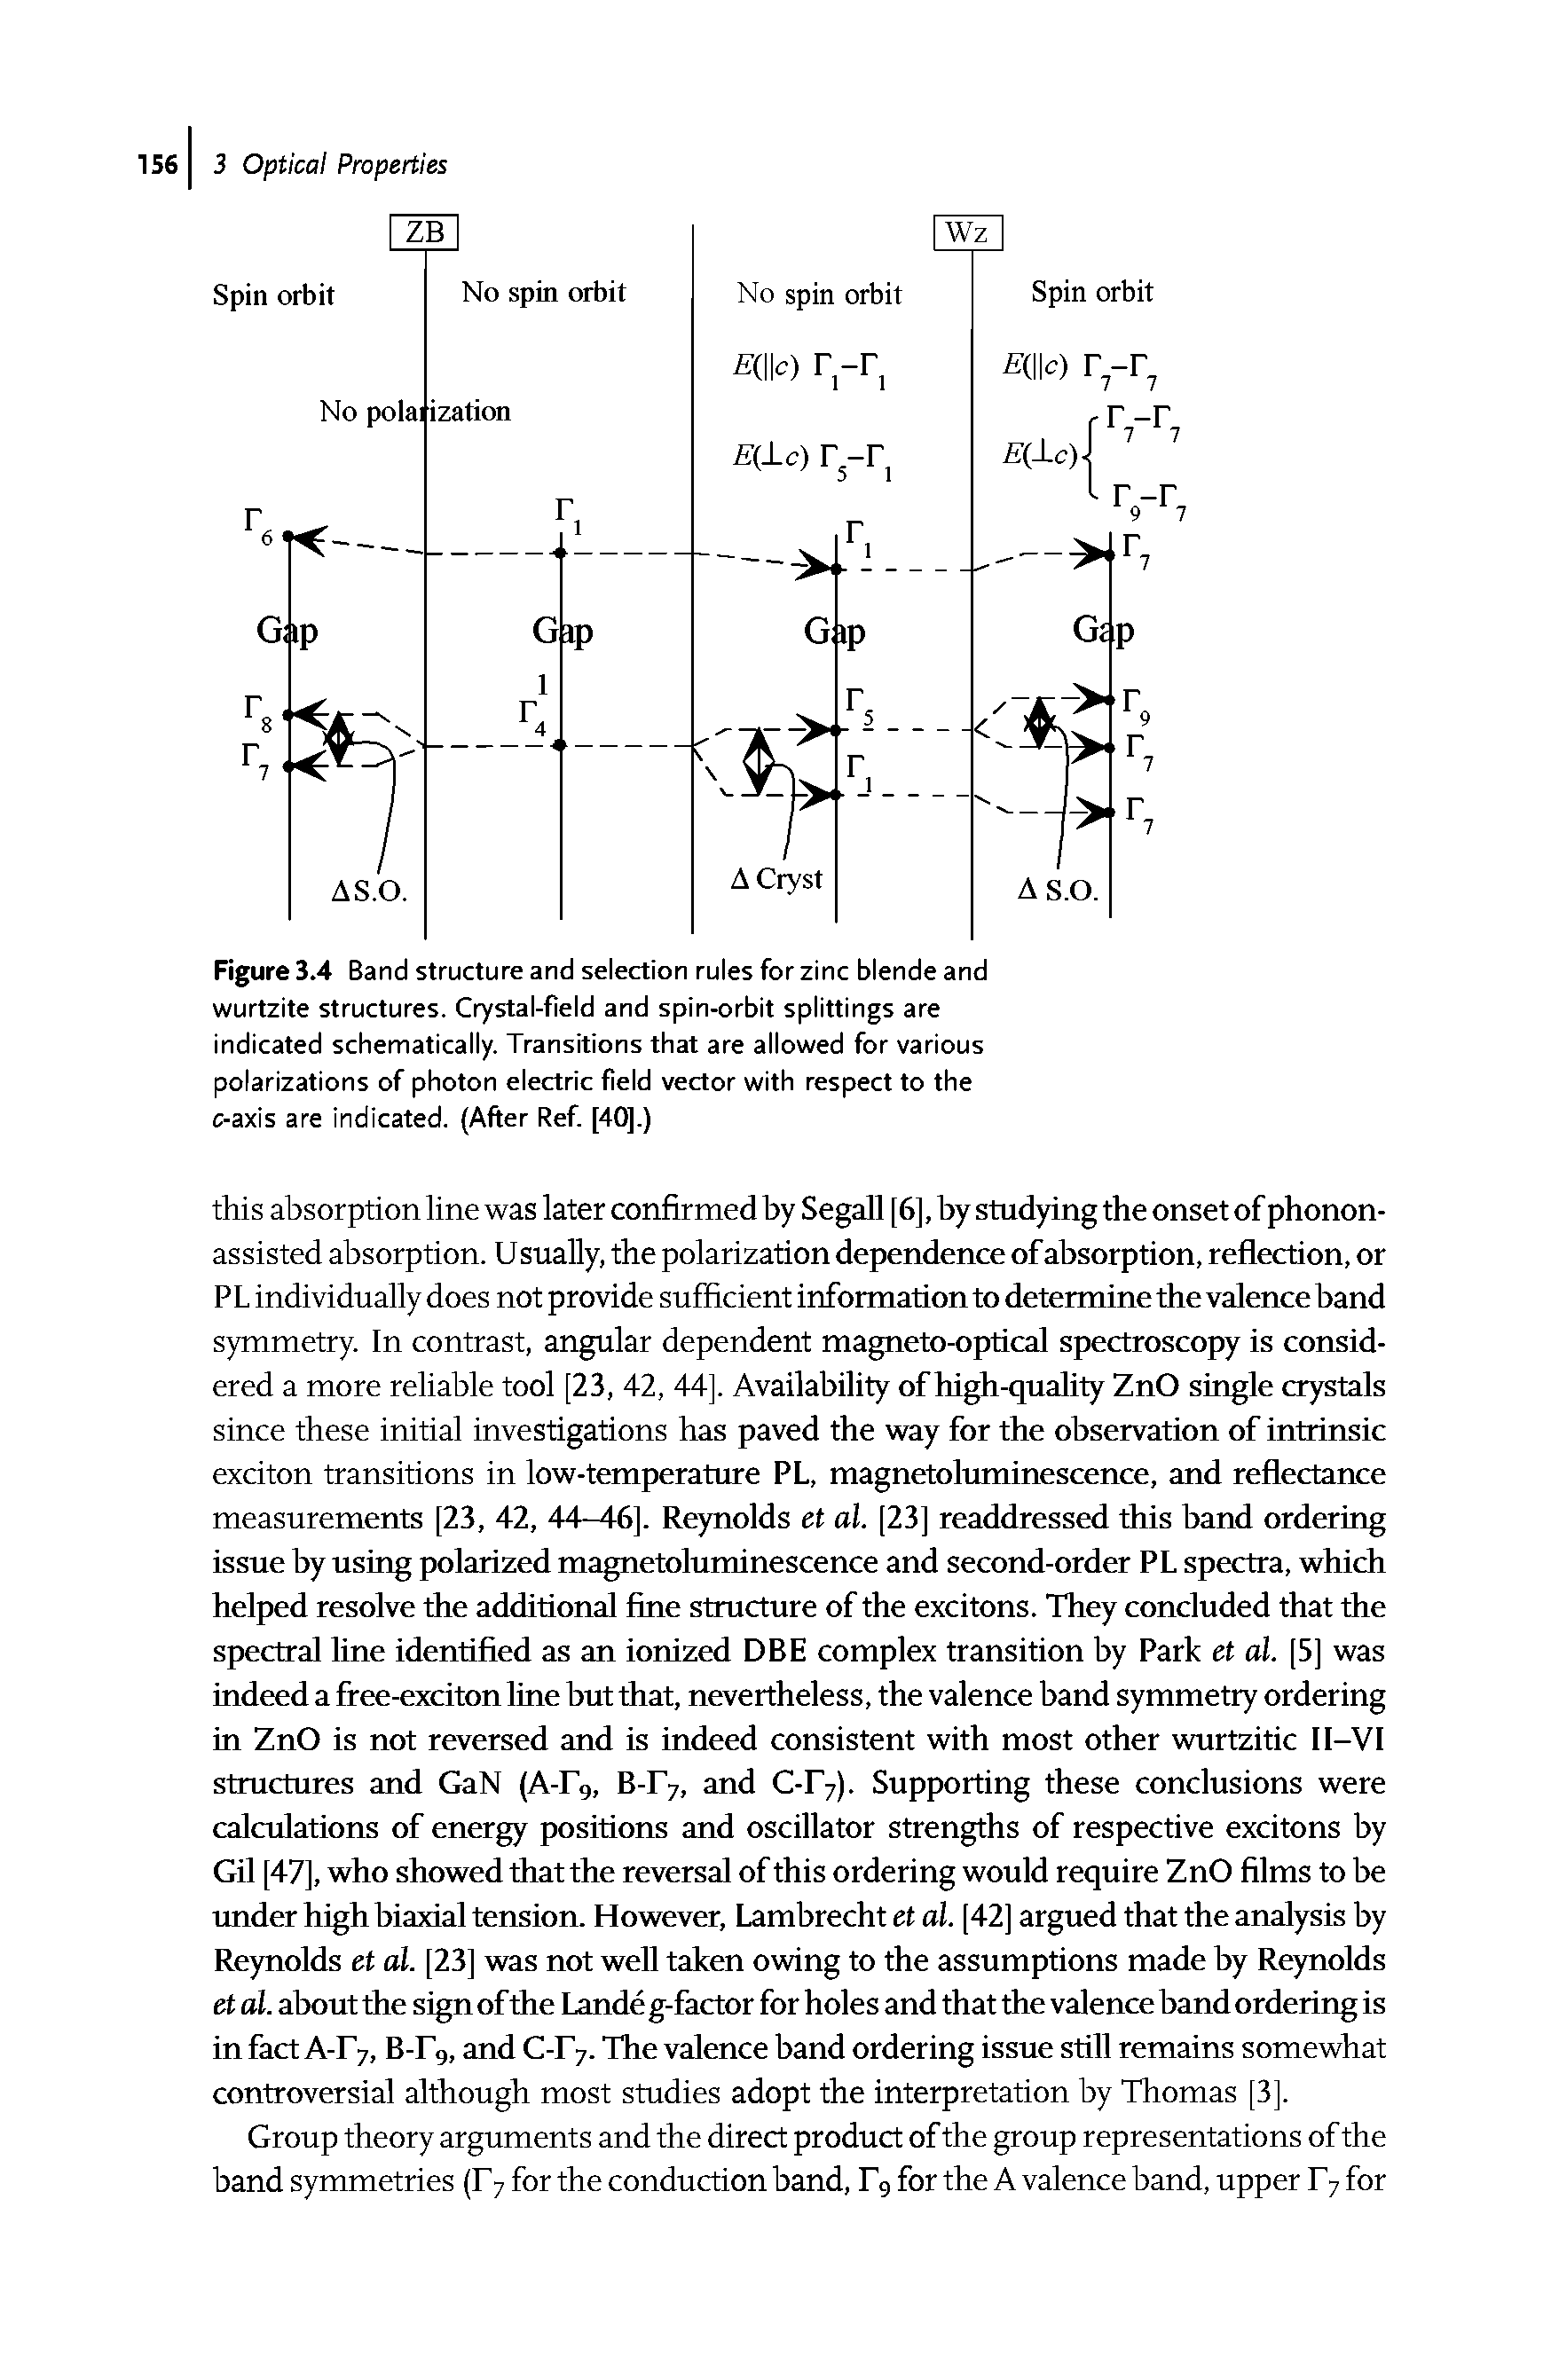 Figure 3.4 Band structure and selection rules for zinc blende and wurtzite structures. Crystal-field and spin-orbit splittings are indicated schematically. Transitions that are allowed for various polarizations of photon electric field vector with respect to the c-axis are indicated. (After Ref [40].)...